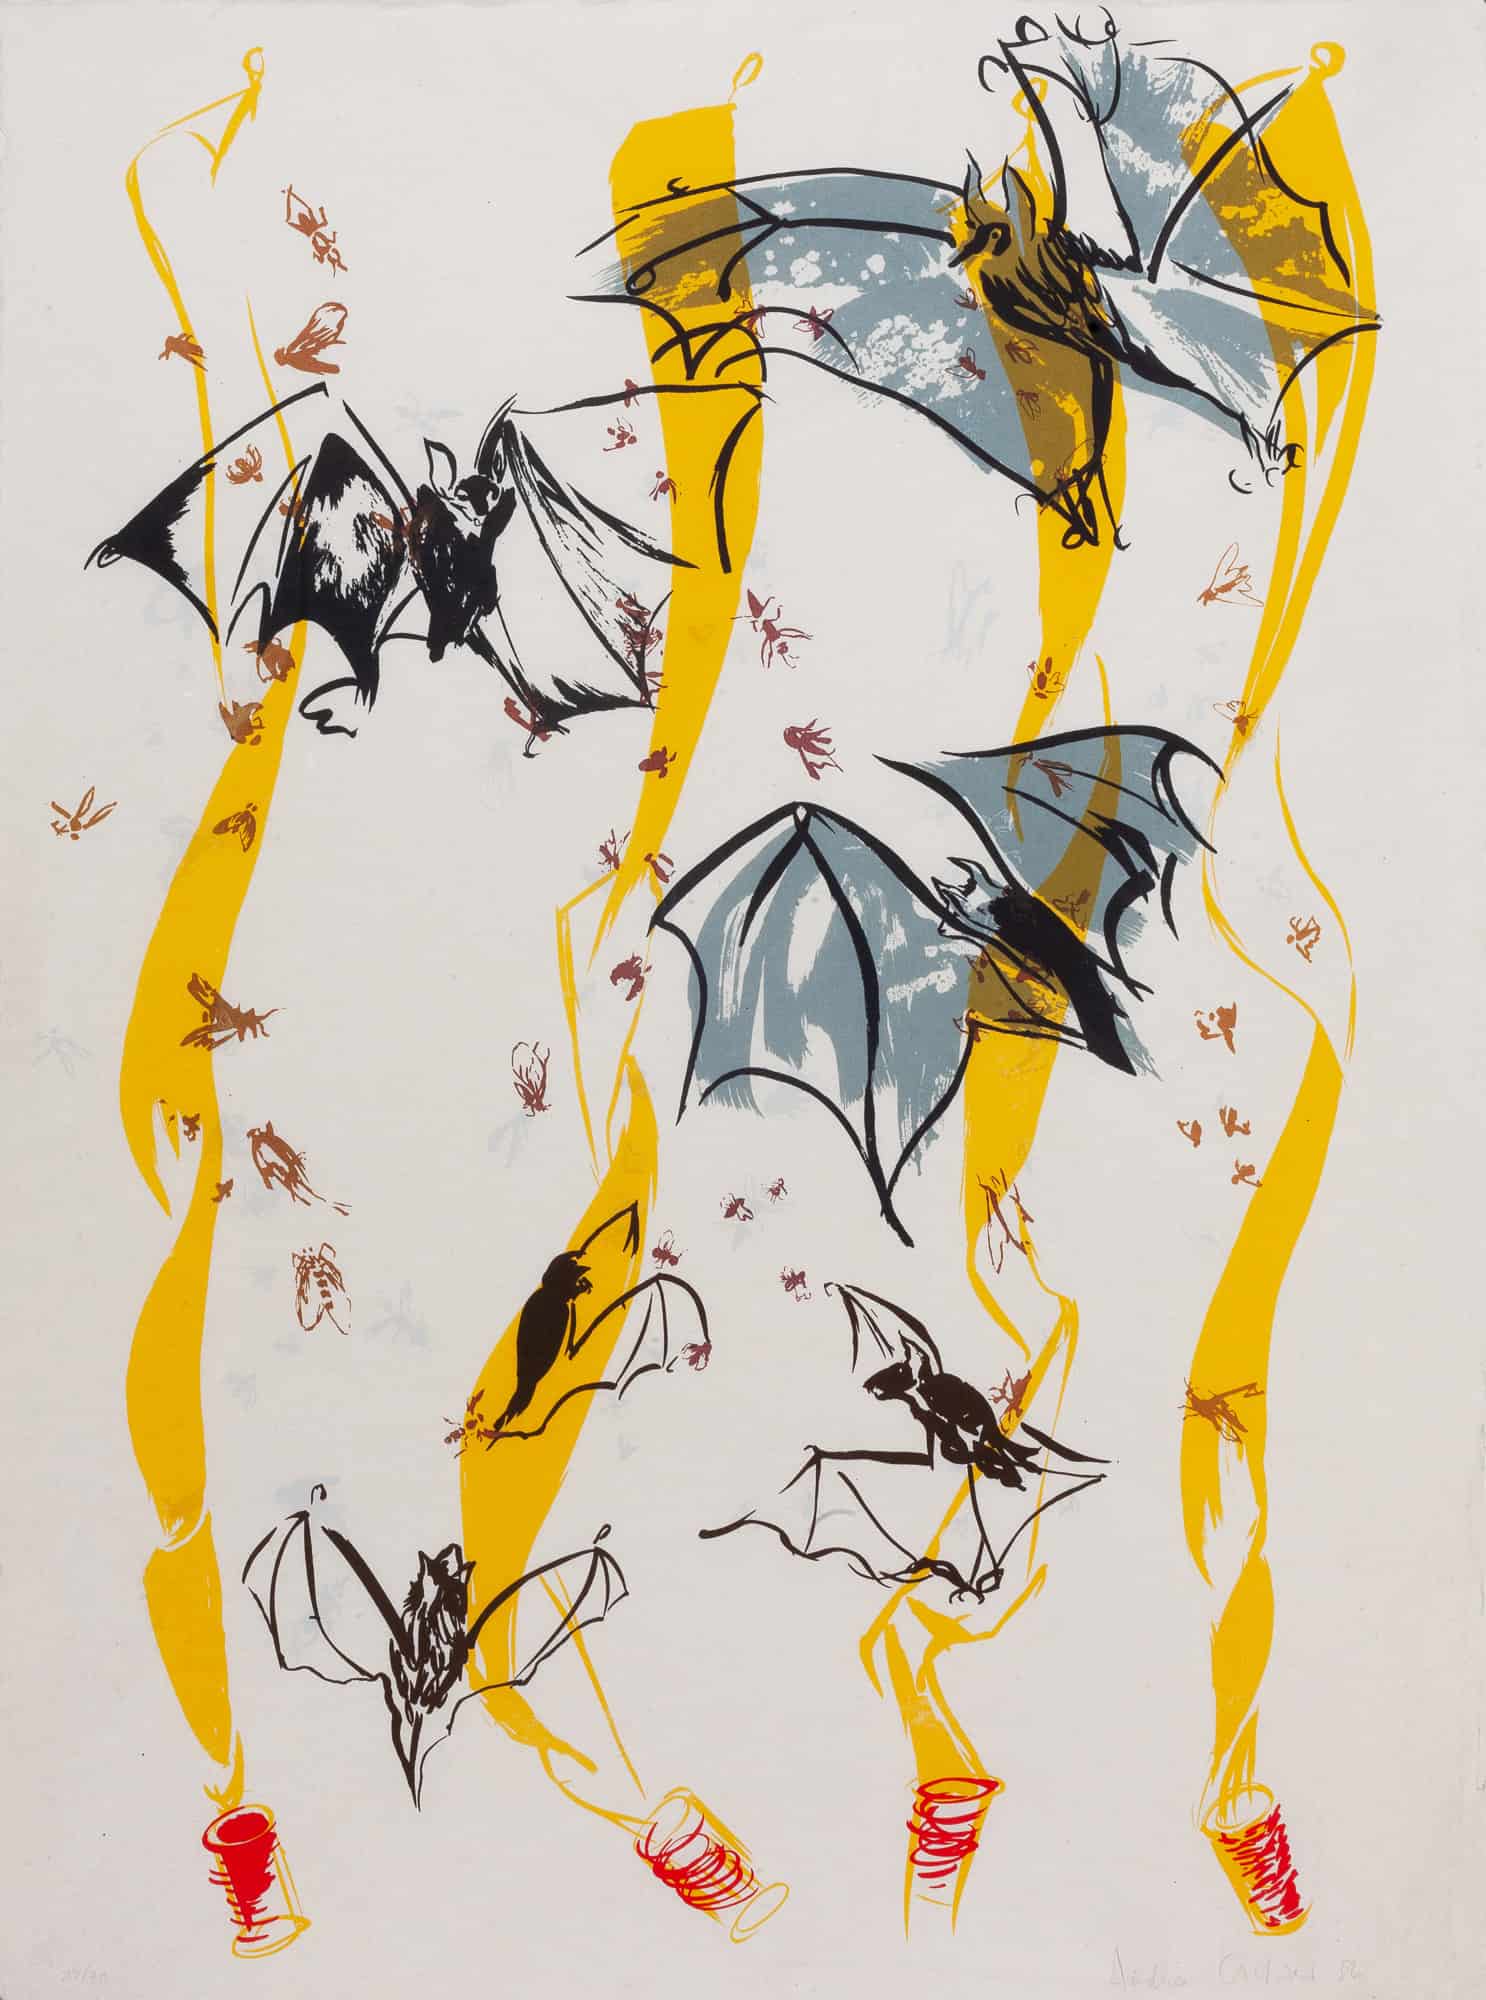 Bats and bugs fly with four pulled out flypapers in the background.